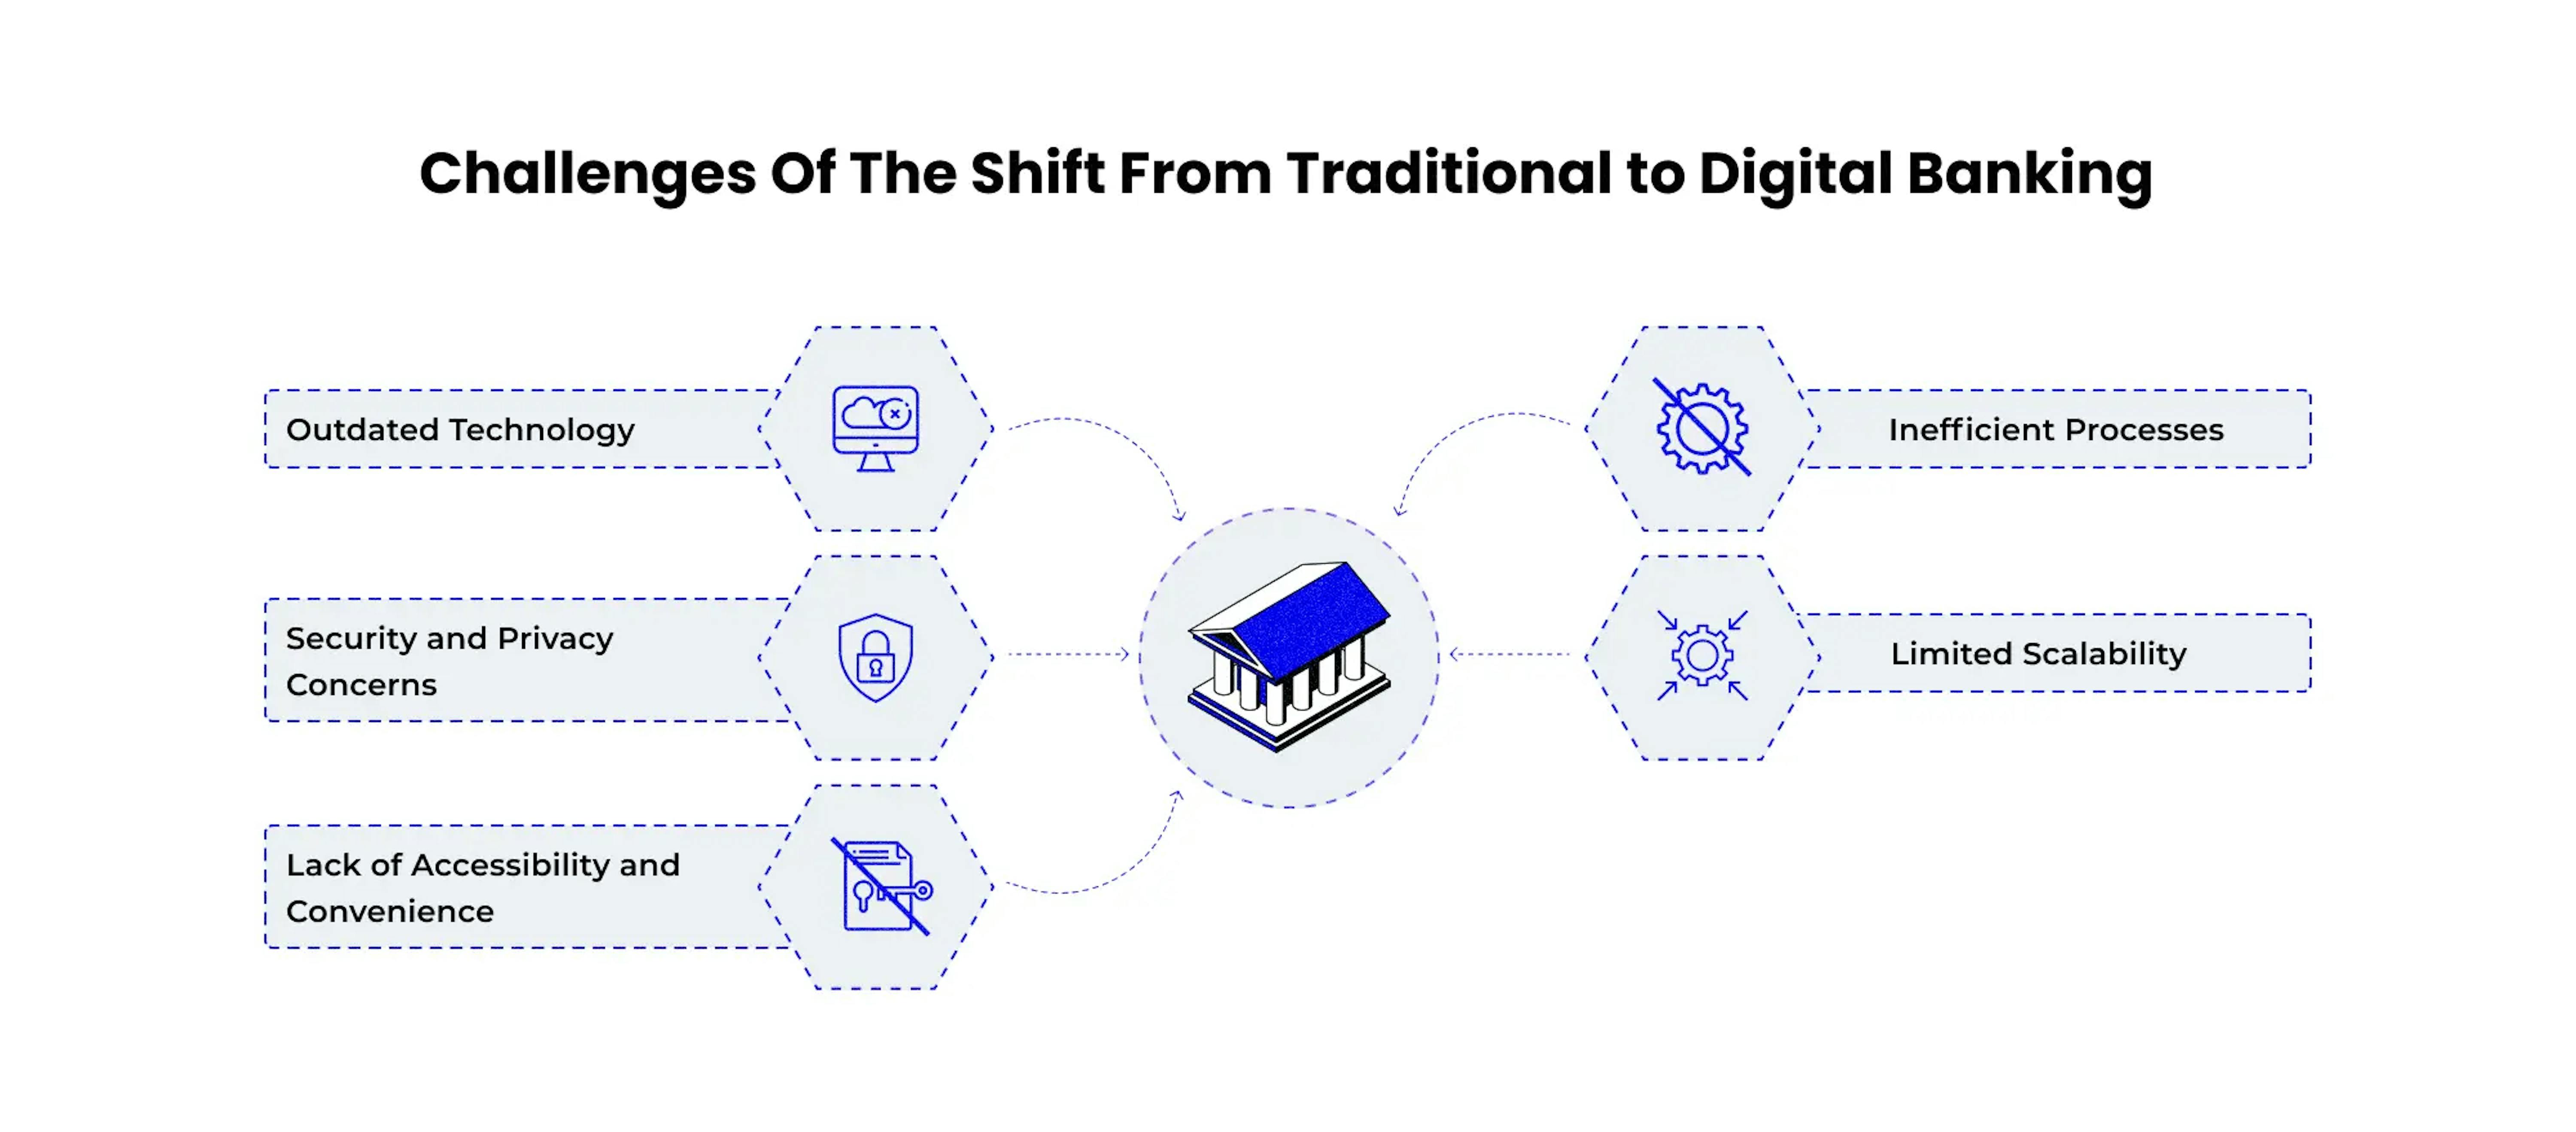 Challenges of the Shift from Traditional to Digital Banking